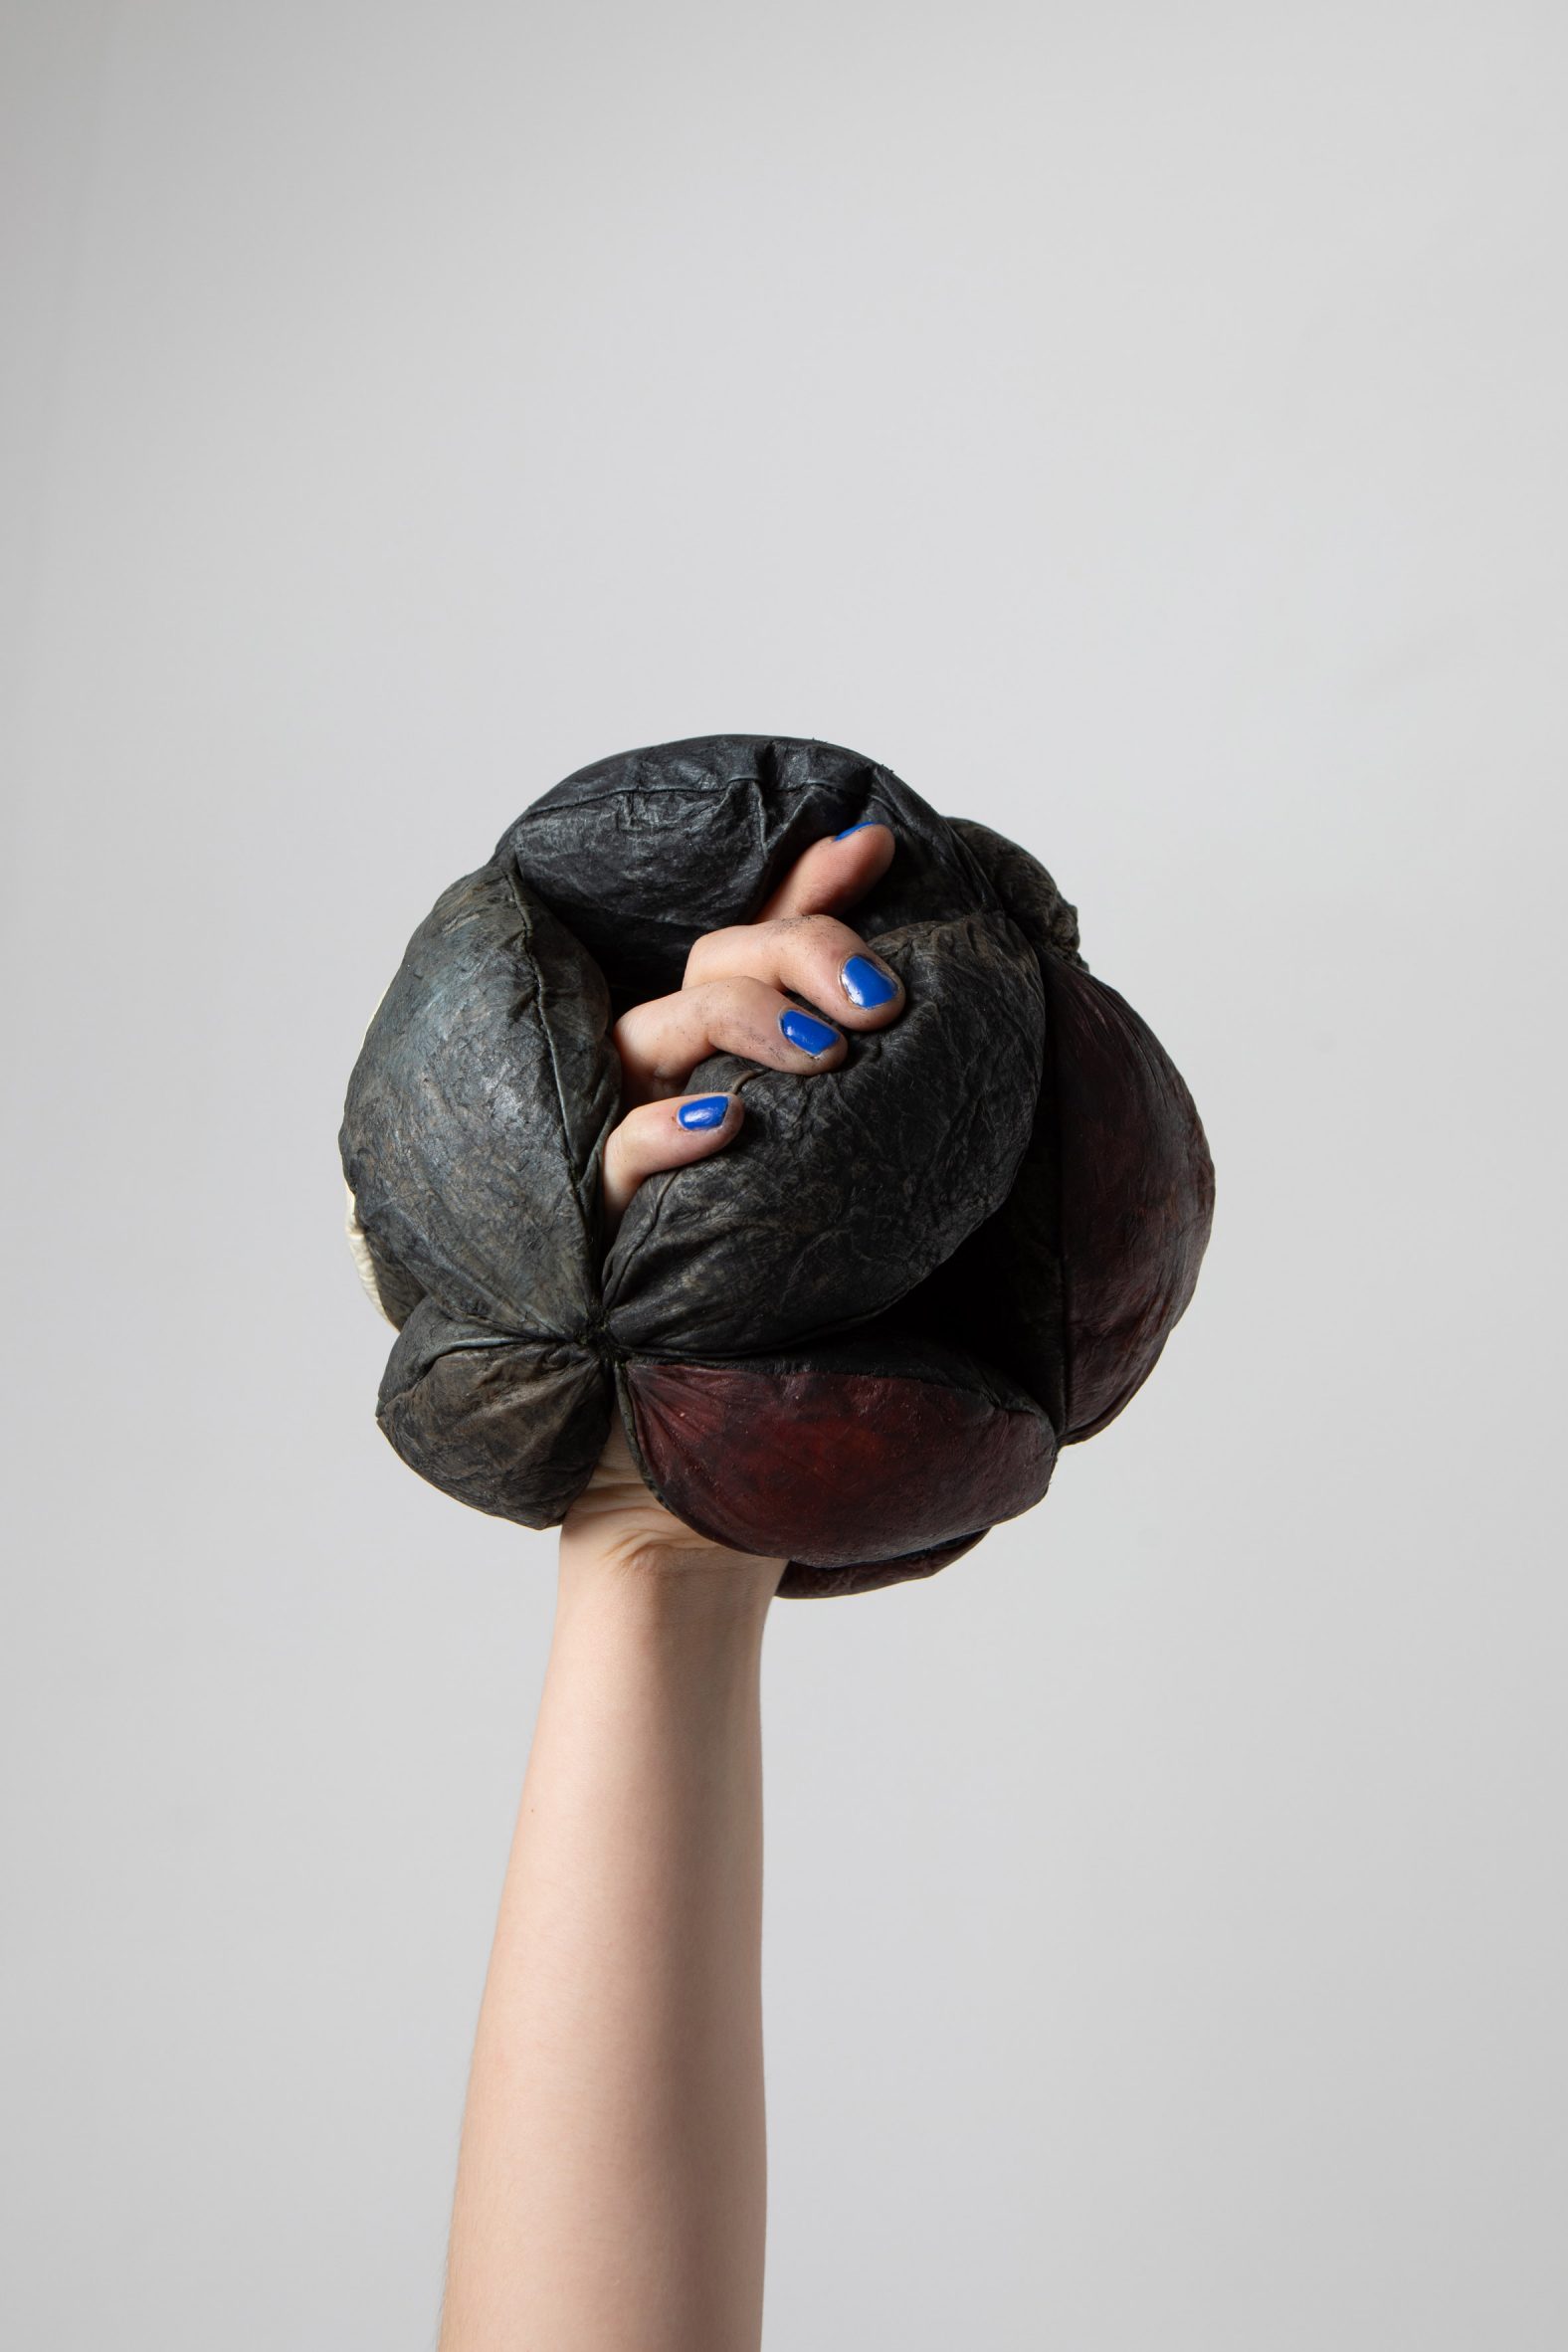 Hand and forearm with hand encased in fabric sphere